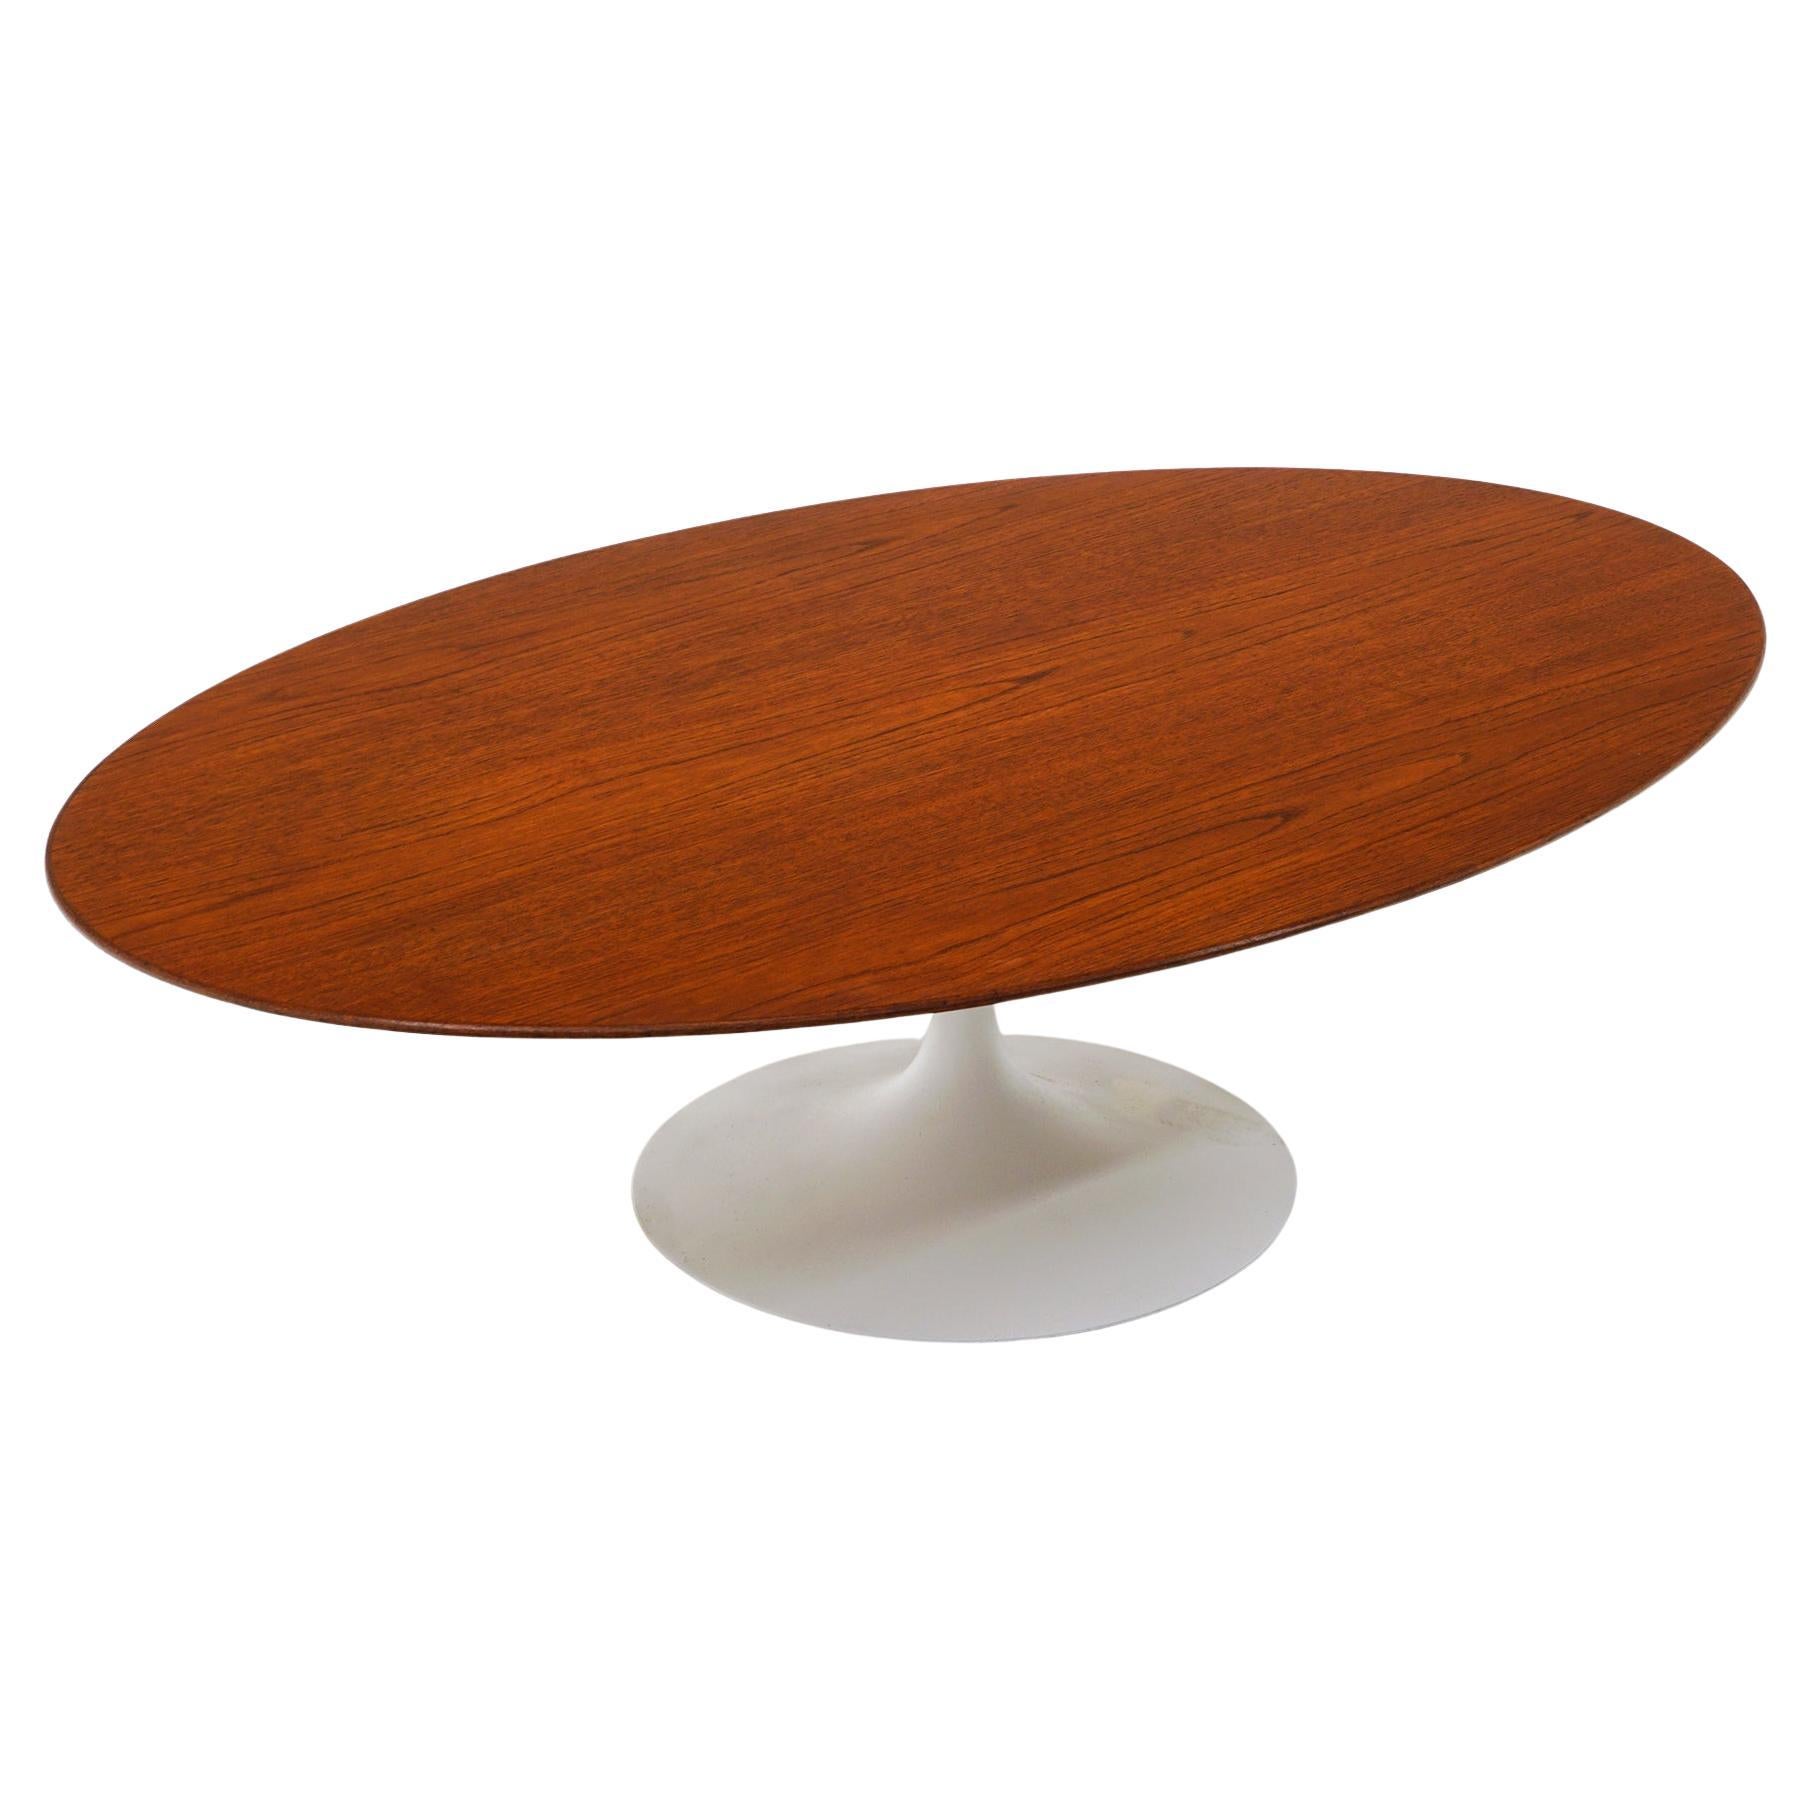 Early Oval Saarinen for Knoll Coffee Table. Out of Production 54" Walnut Top.